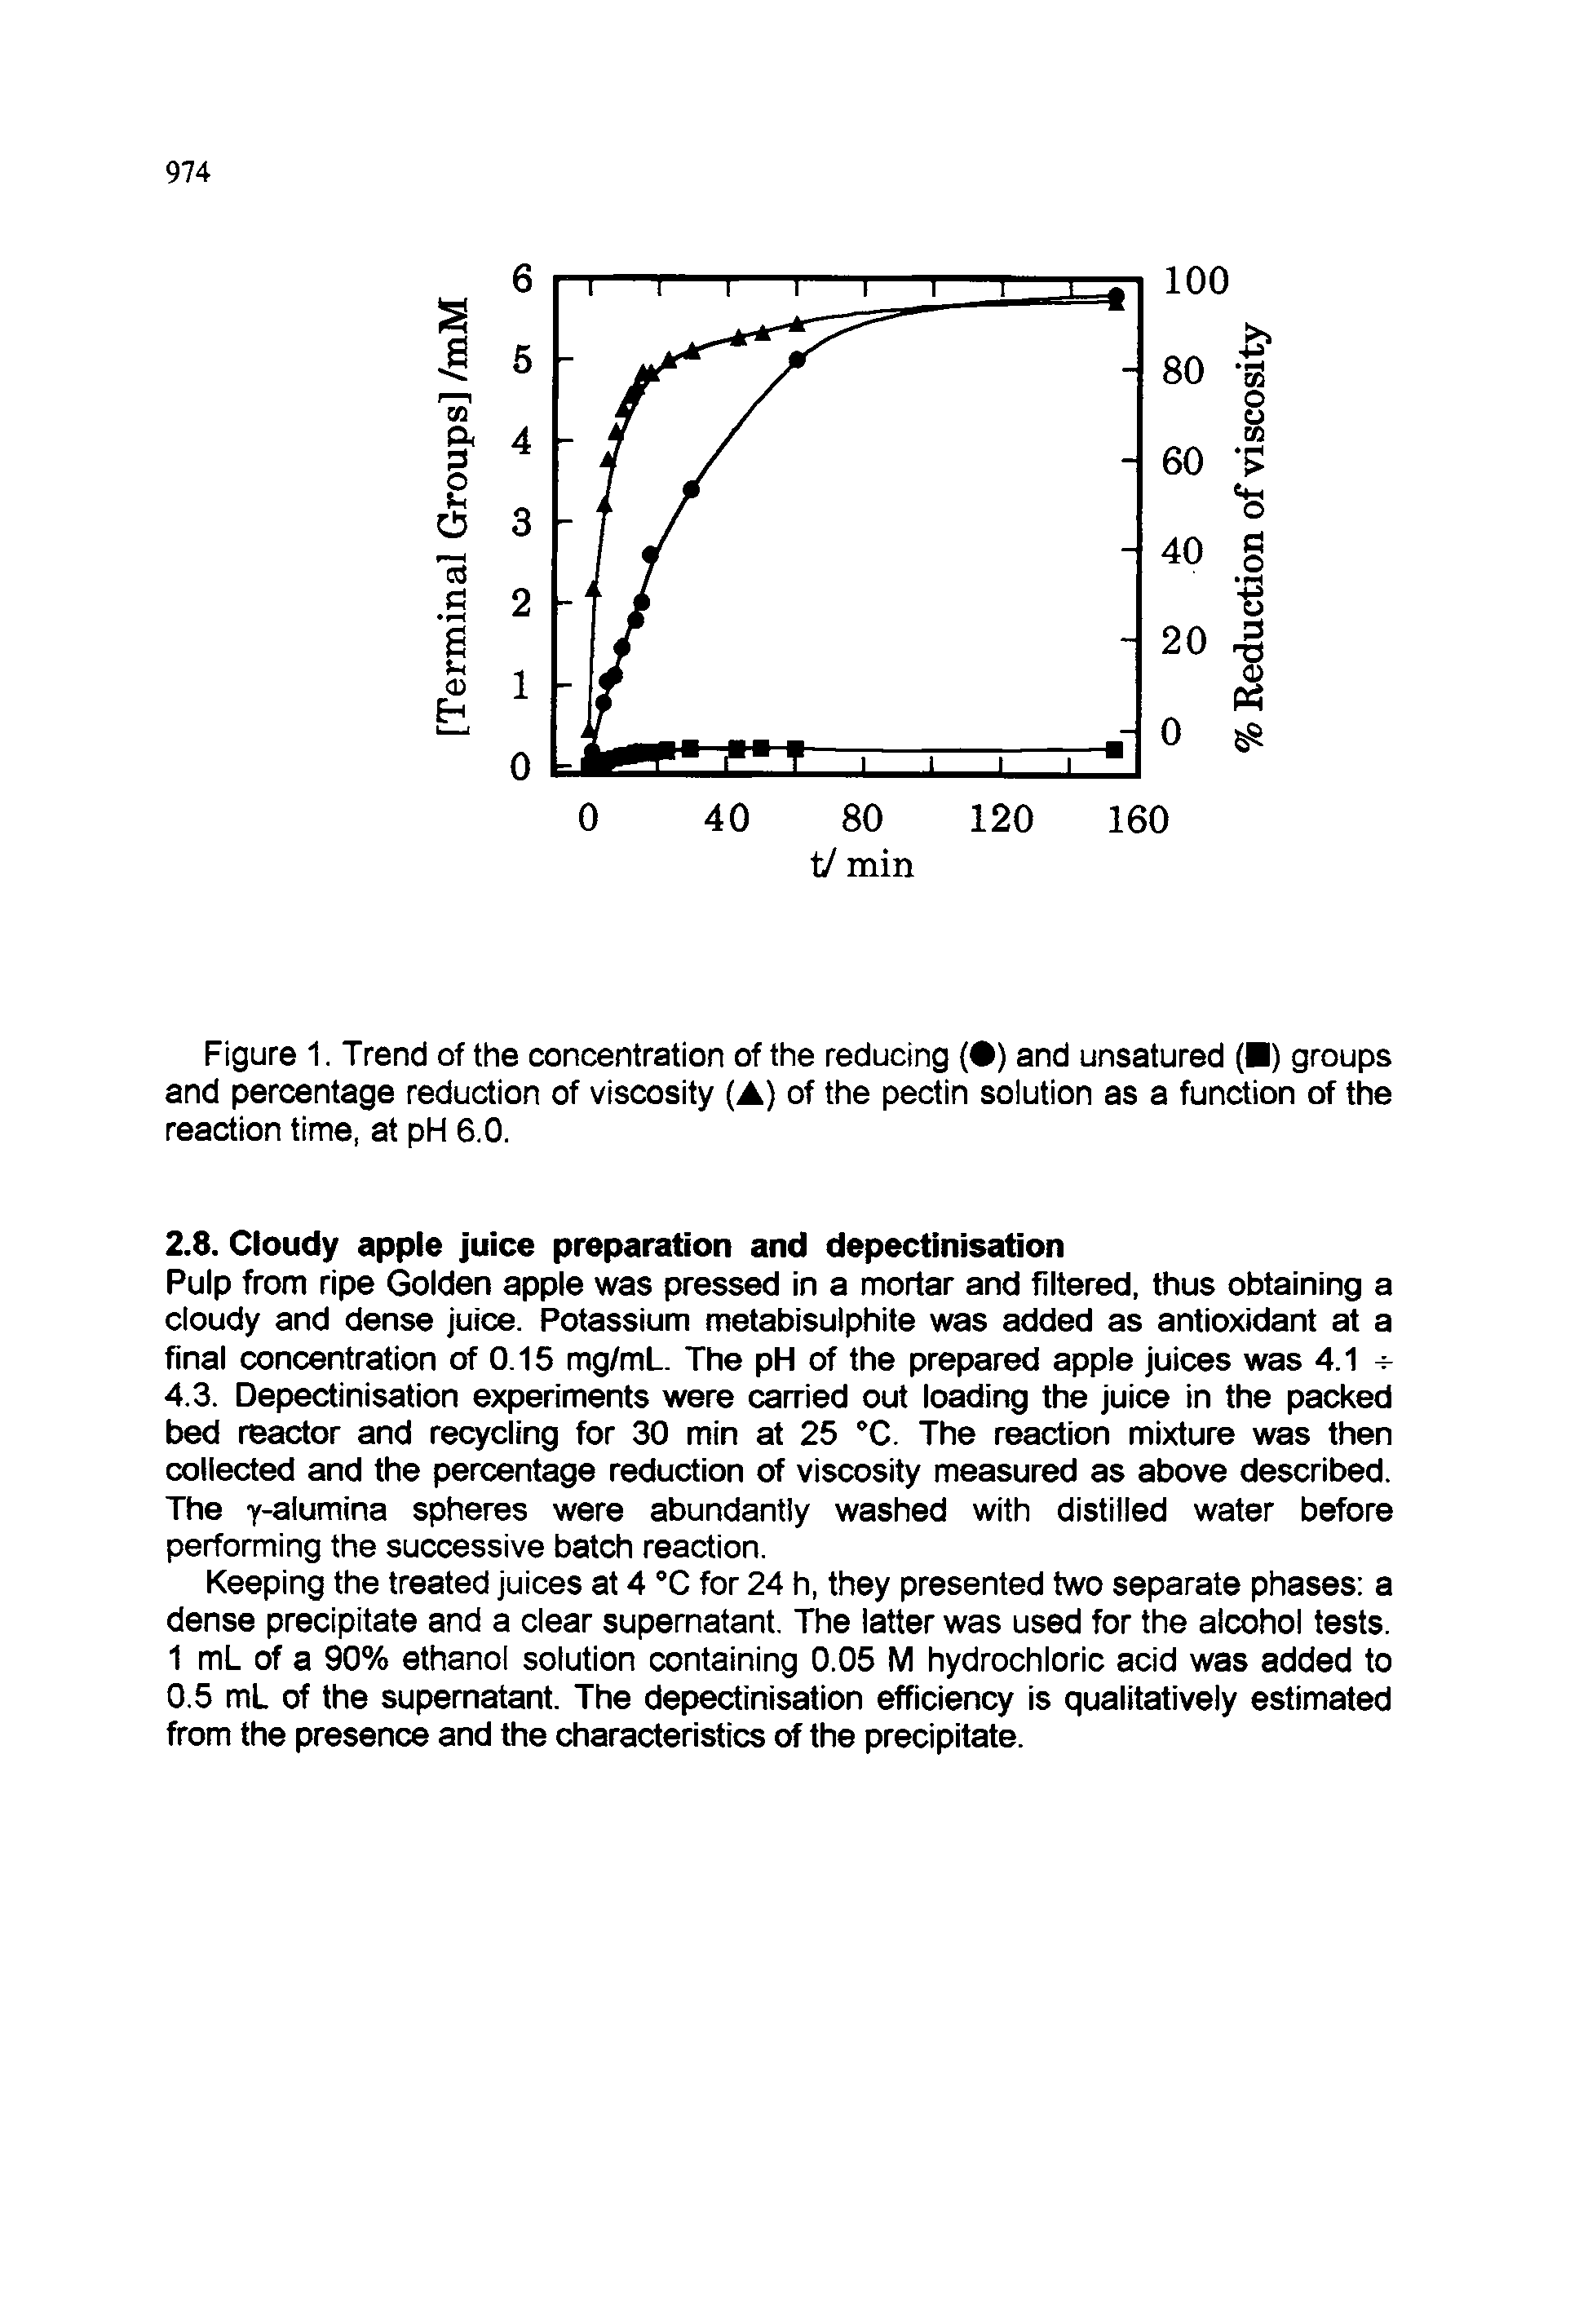 Figure 1. Trend of the concentration of the reducing ( ) and unsatured ( ) groups and percentage reduction of viscosity (A) of the pectin solution as a function of the reaction time, at pH 6.0.